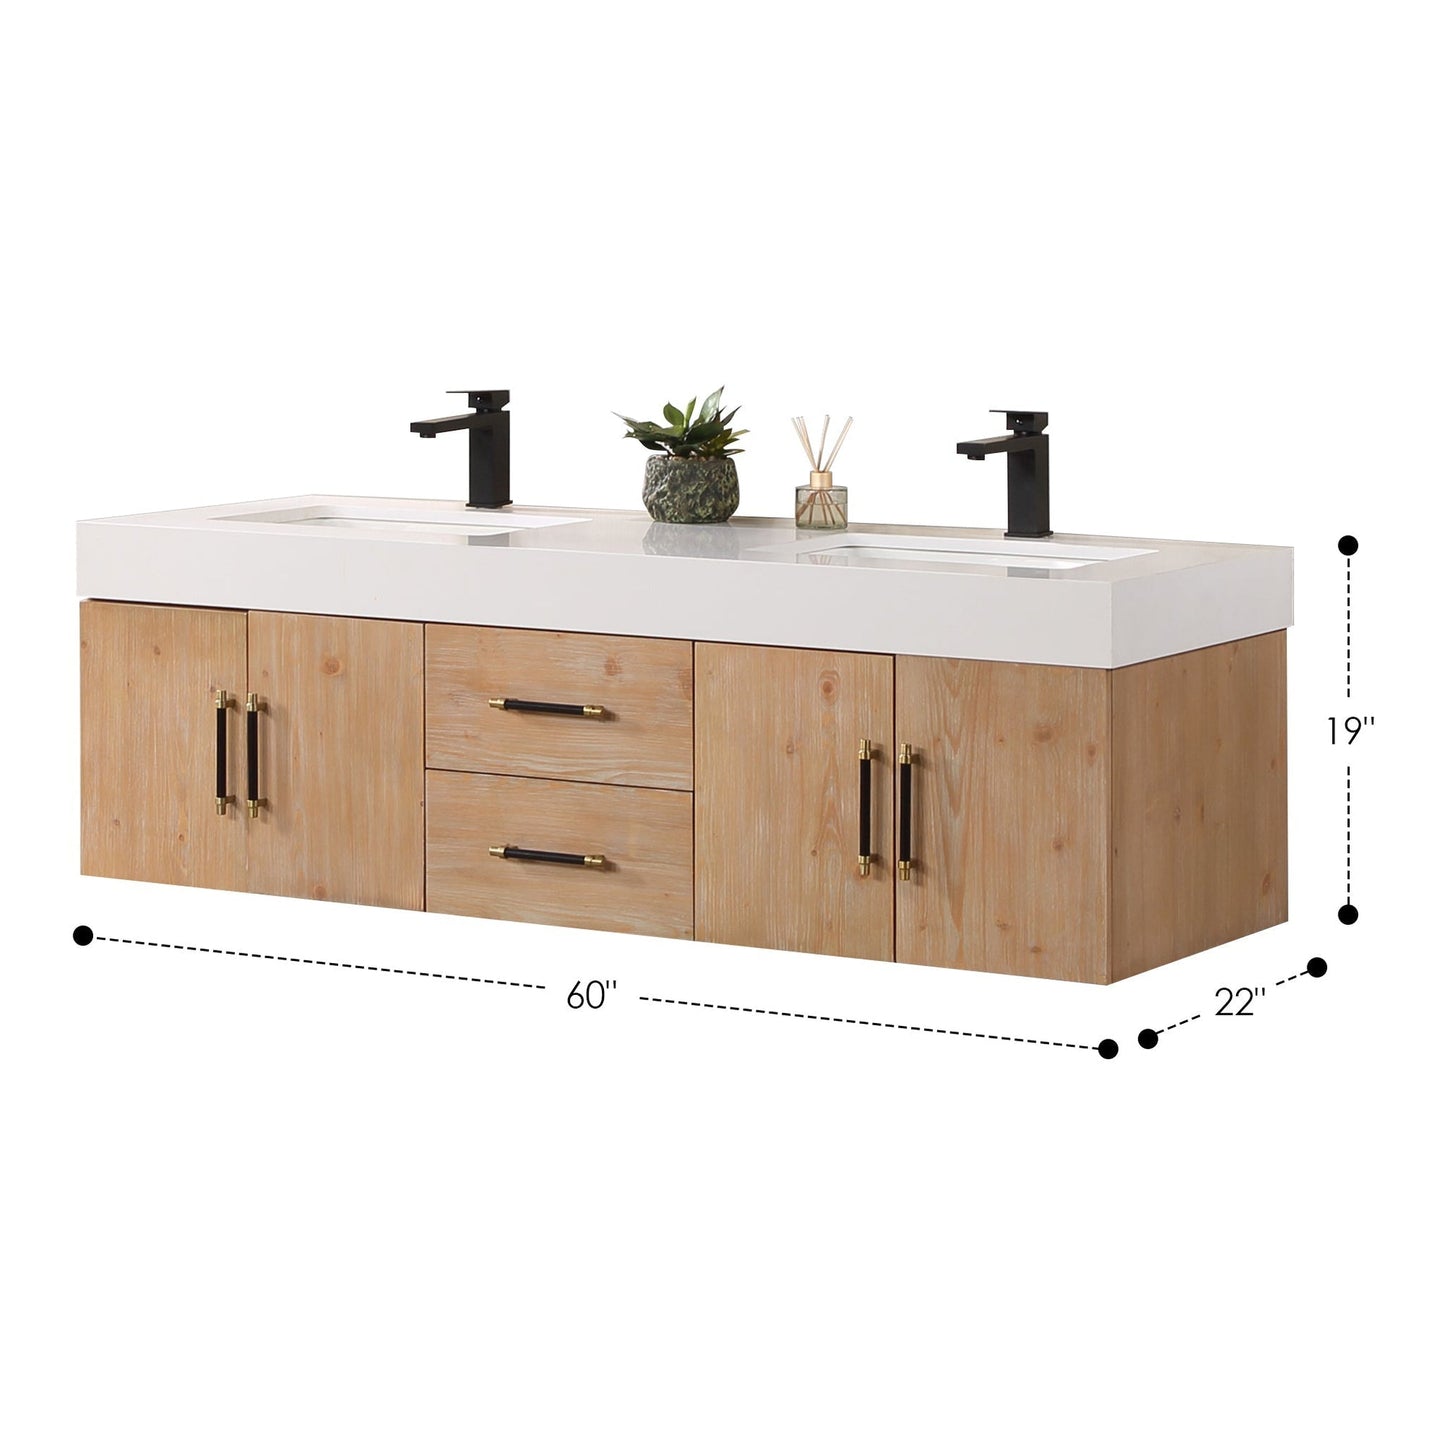 Altair Corchia 60" Light Brown Wall-Mounted Double Bathroom Vanity Set With Mirror, White Composite Stone Top, Two Rectangular Undermount Ceramic Sinks, and Overflow